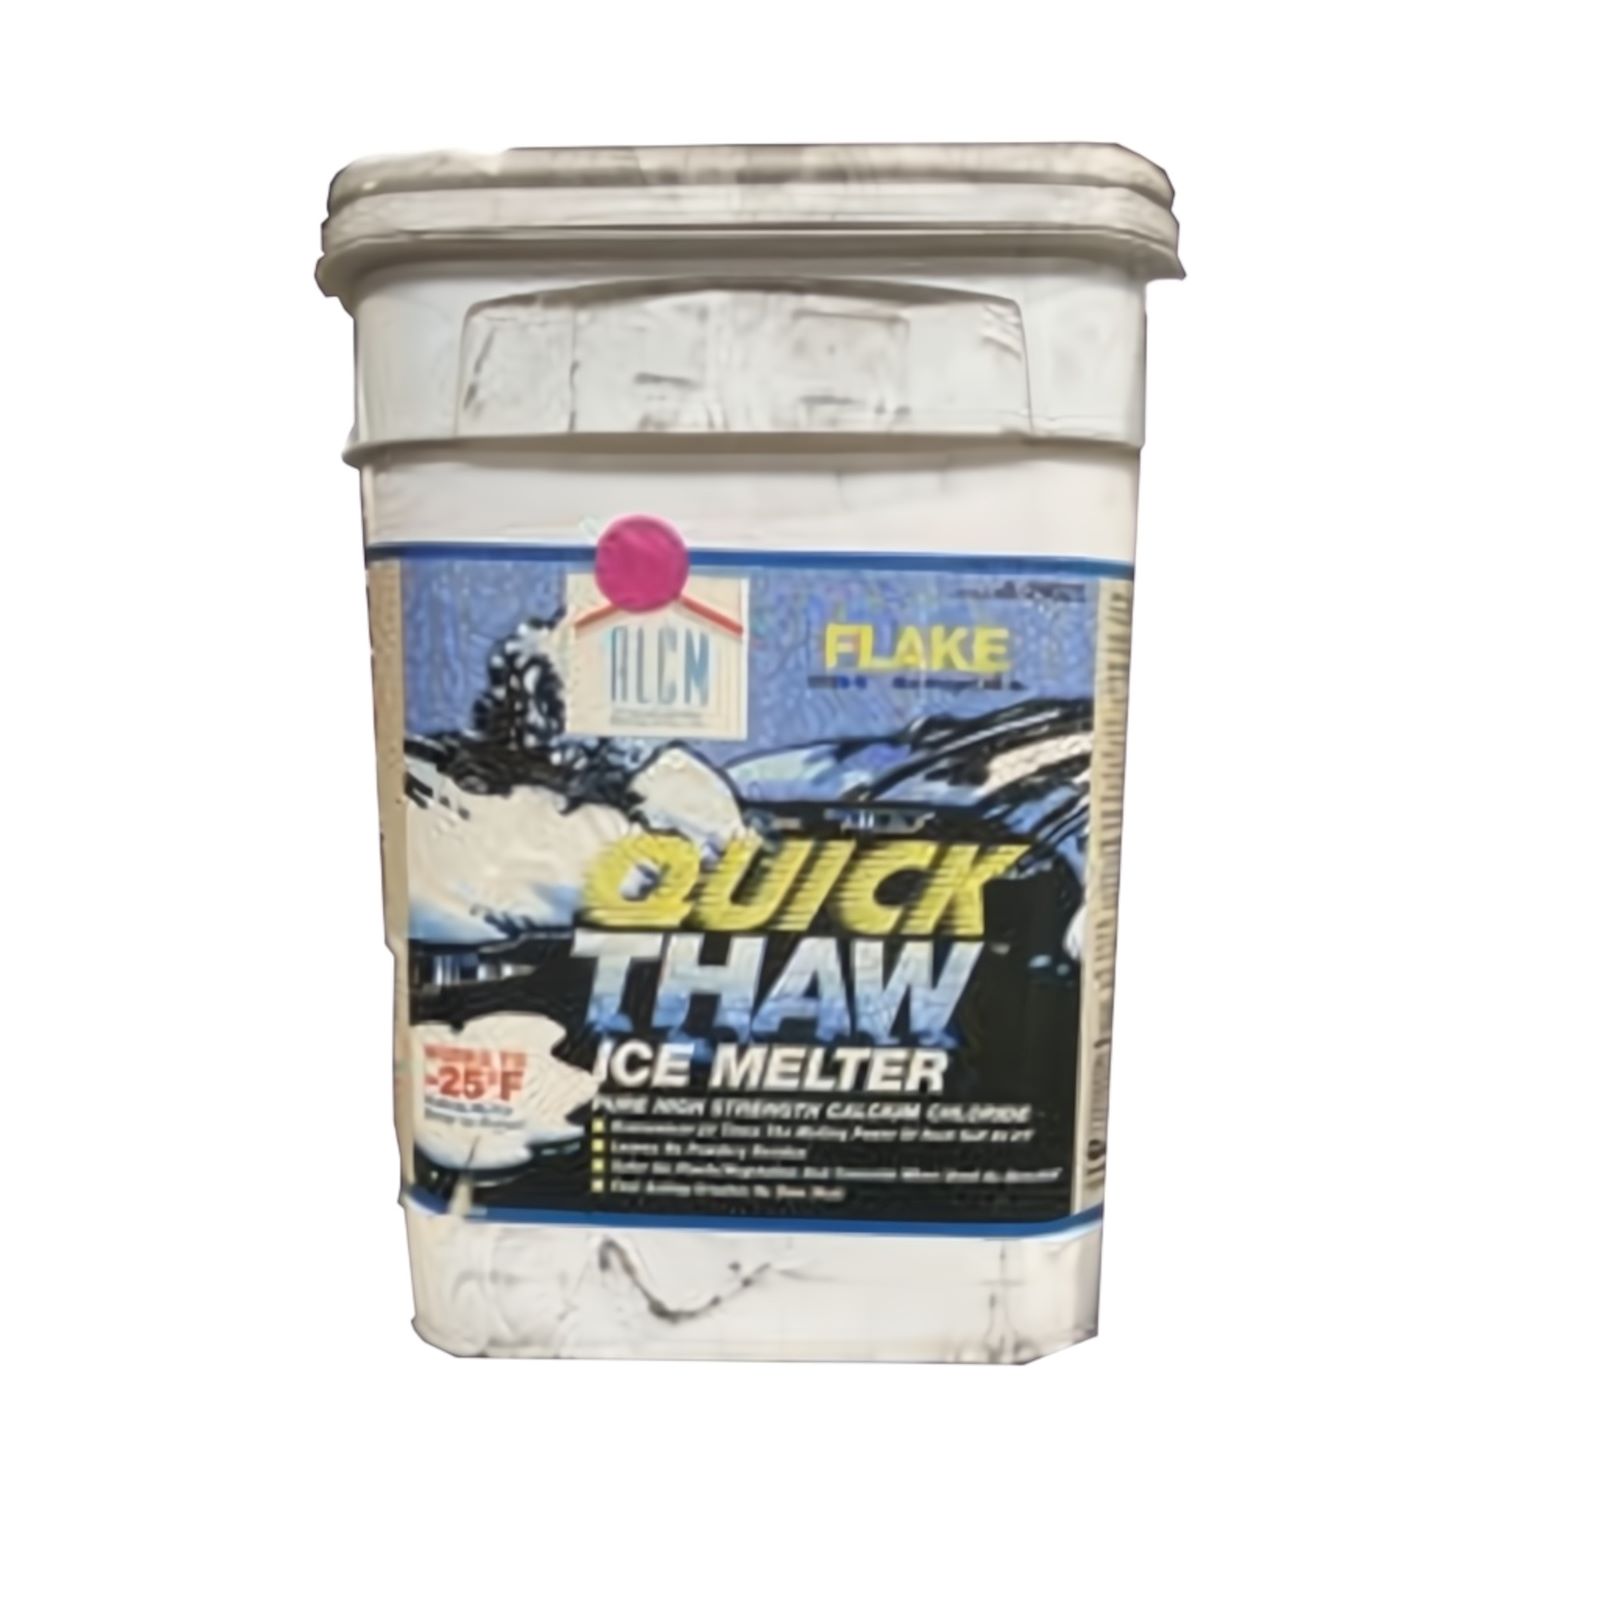 ALCM Quick-Thaw Instant Ice Melter